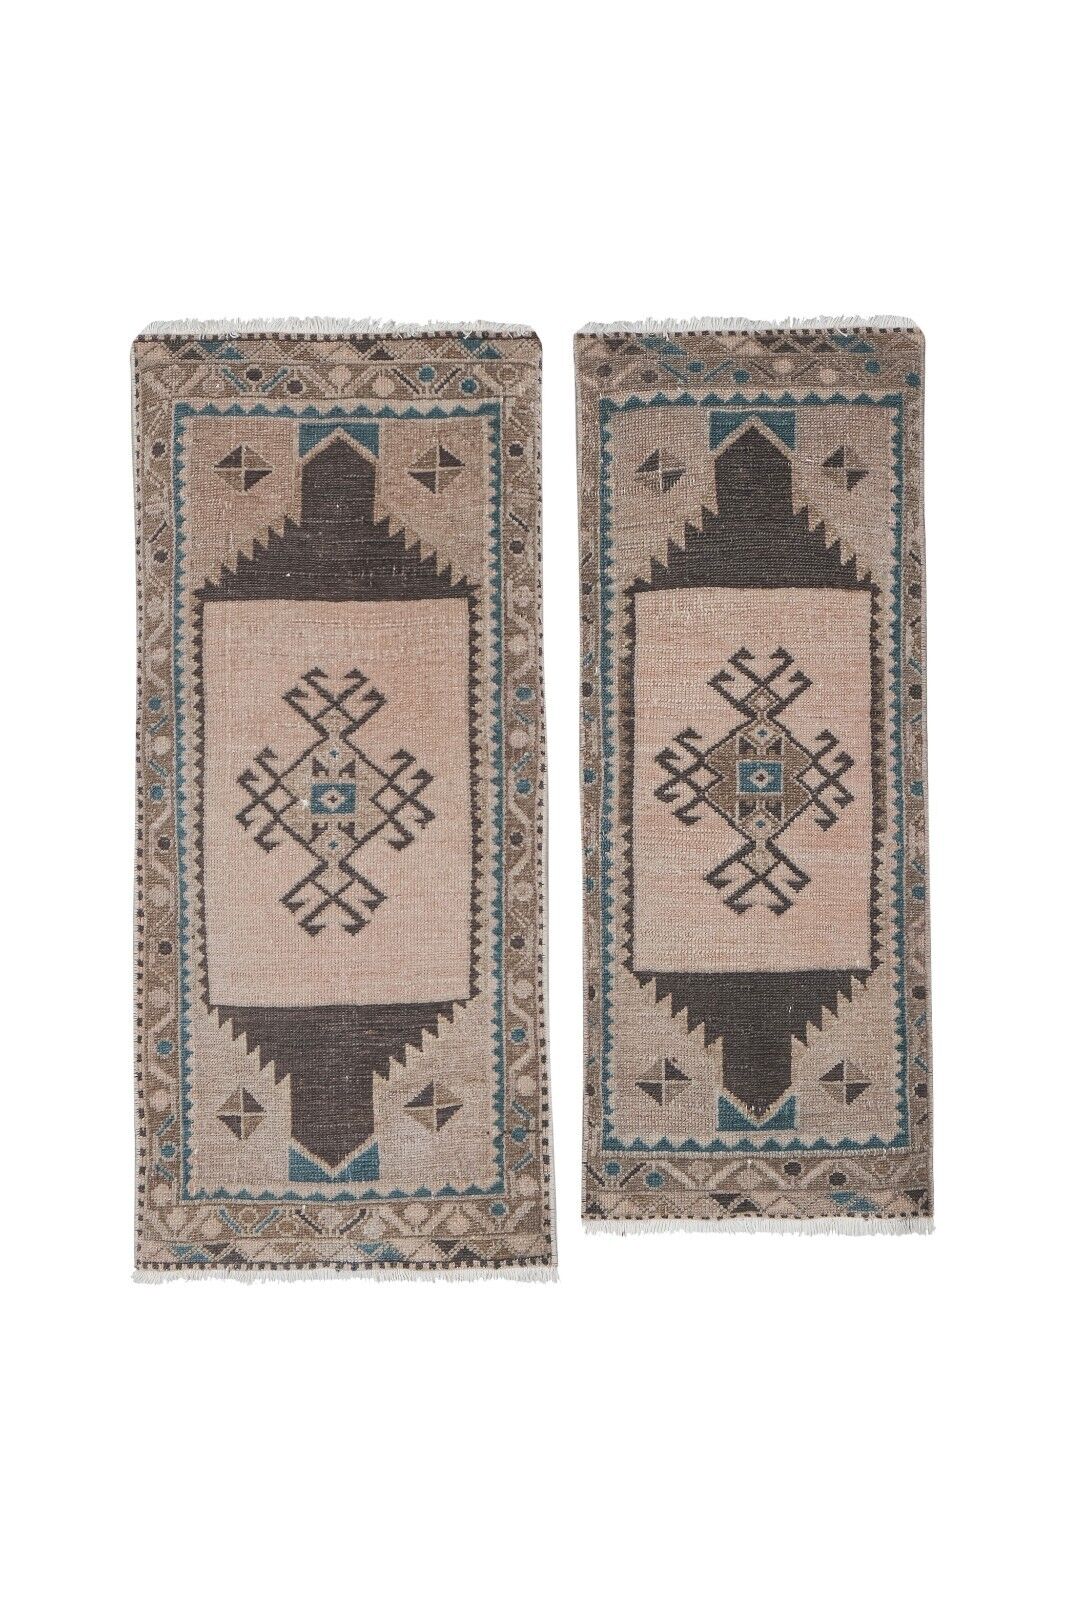 Vintage Turkish Oriental Matching Runner in Muted Colors - a Pair Handmade